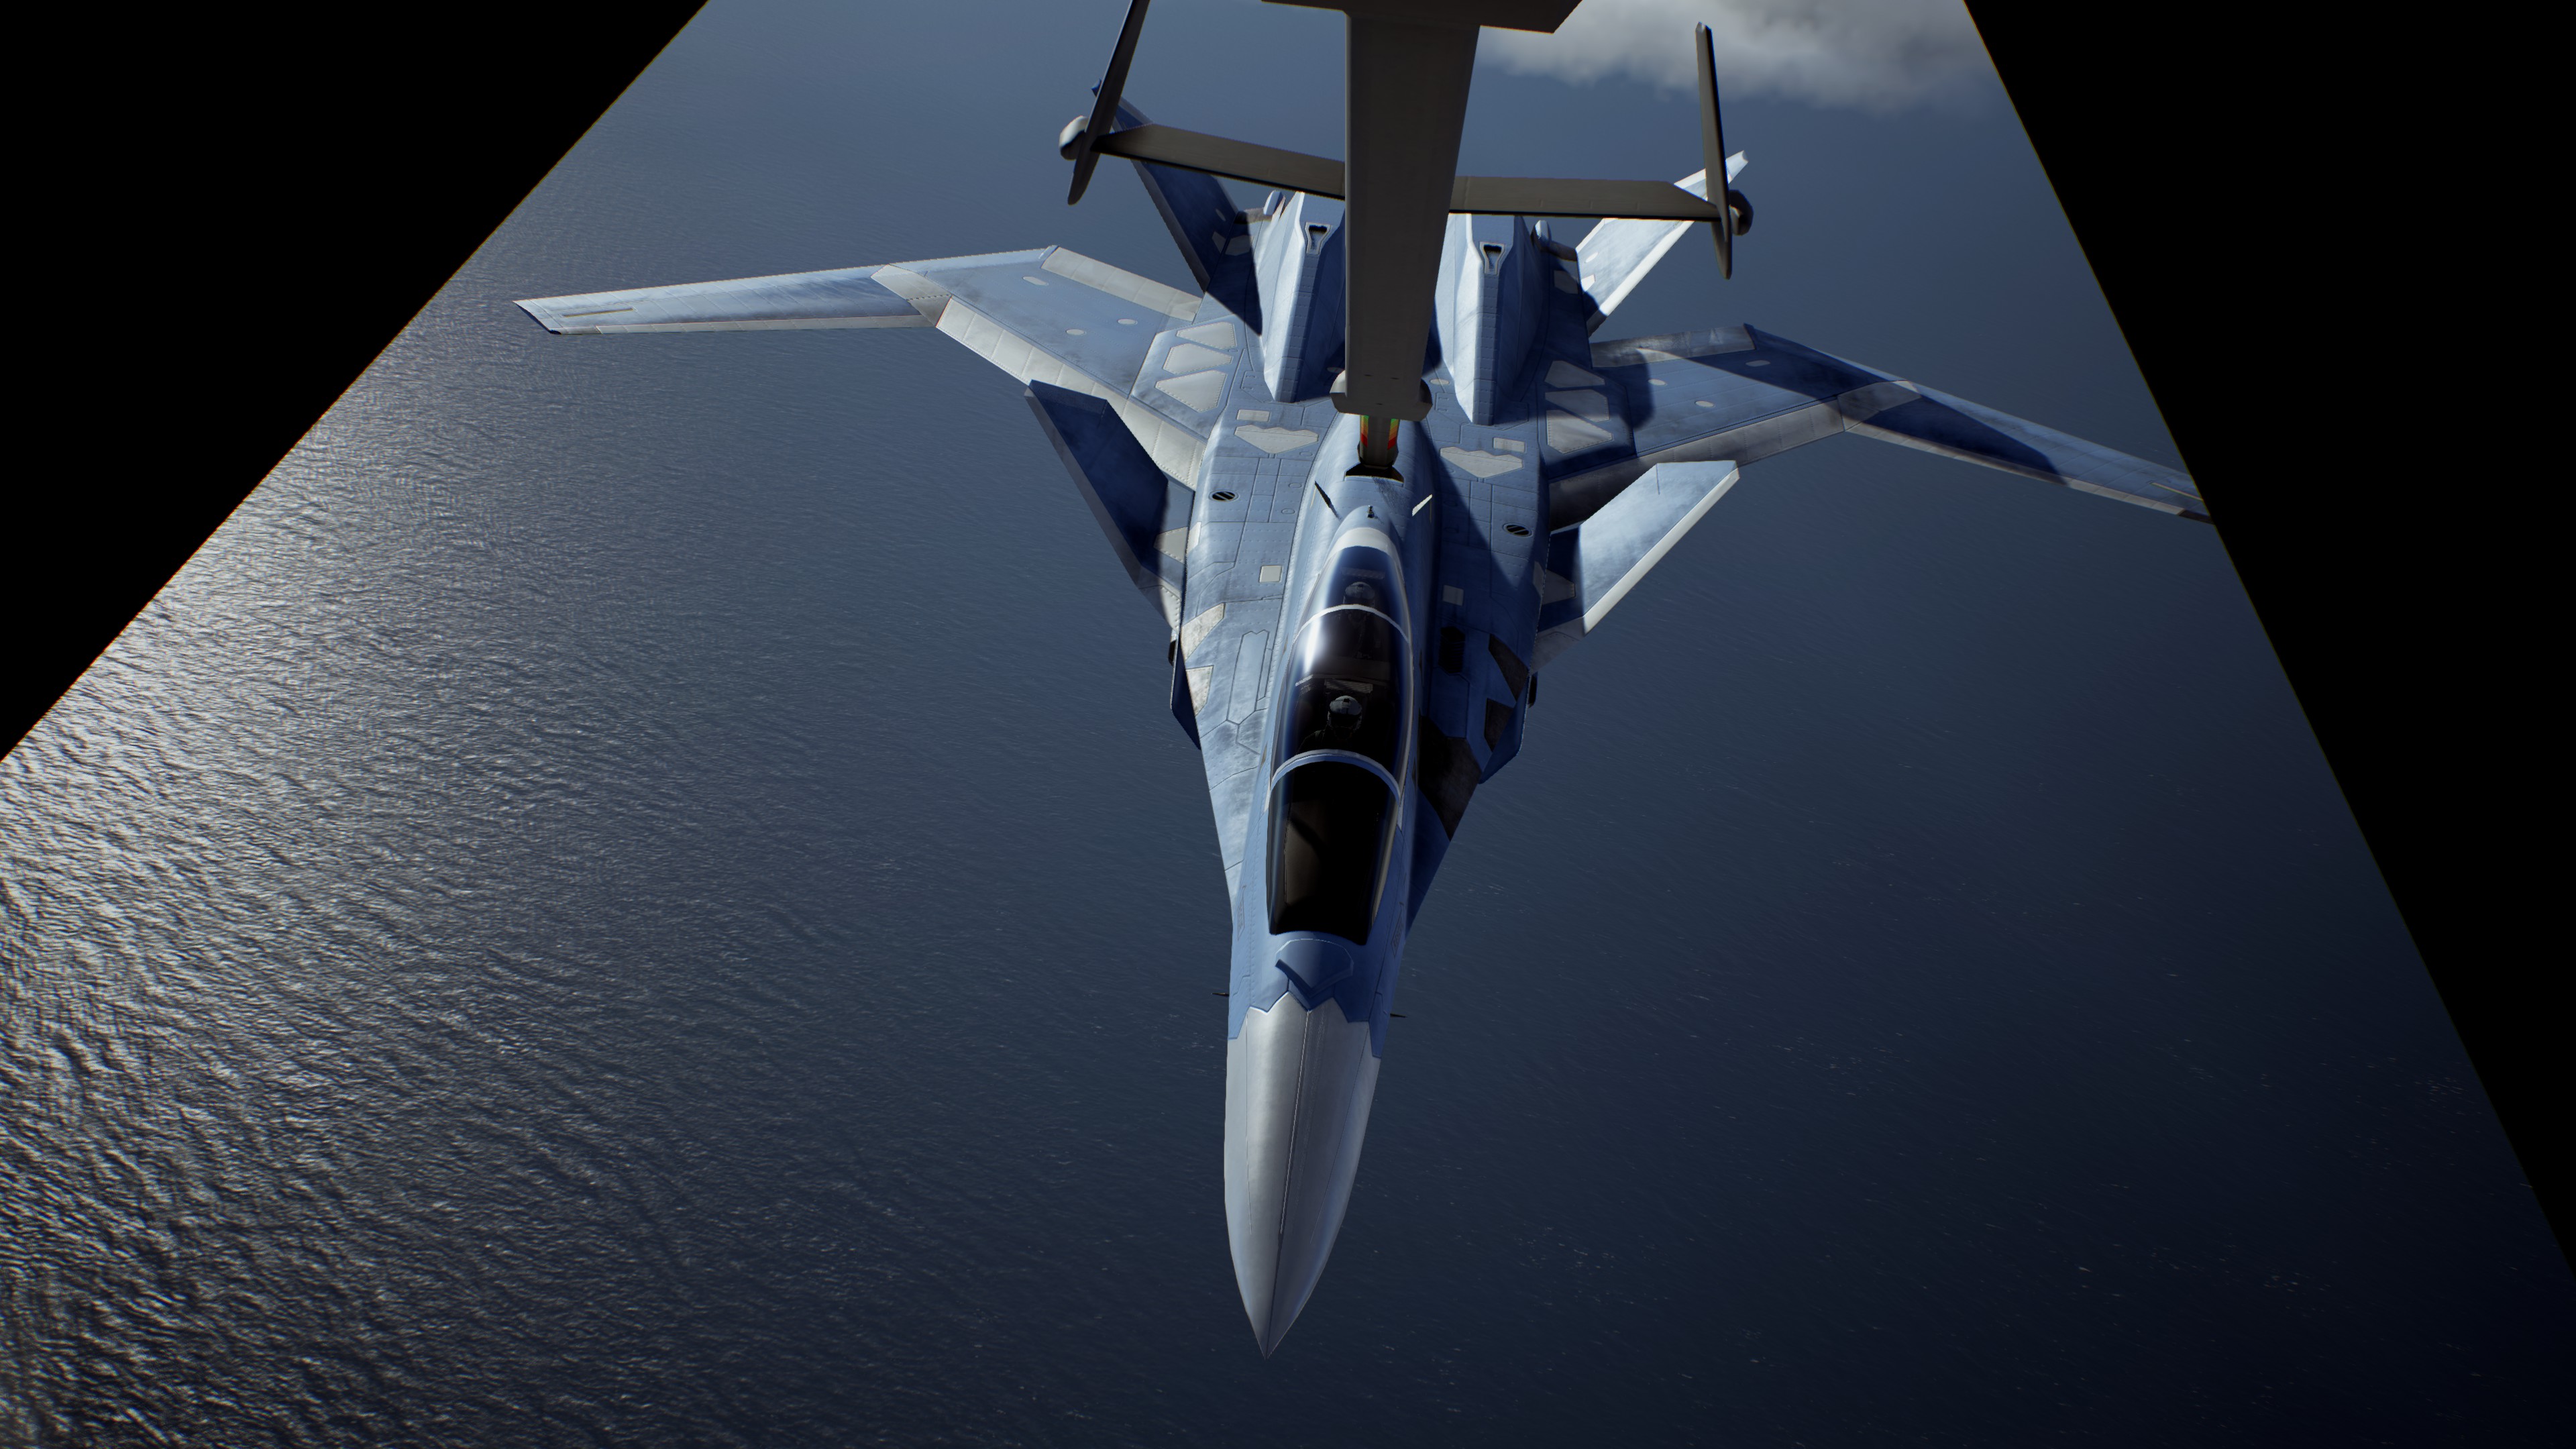 Ace Combat 7' Review: It's Time To Return To The Intense World Of  Strangereal Flight Combat